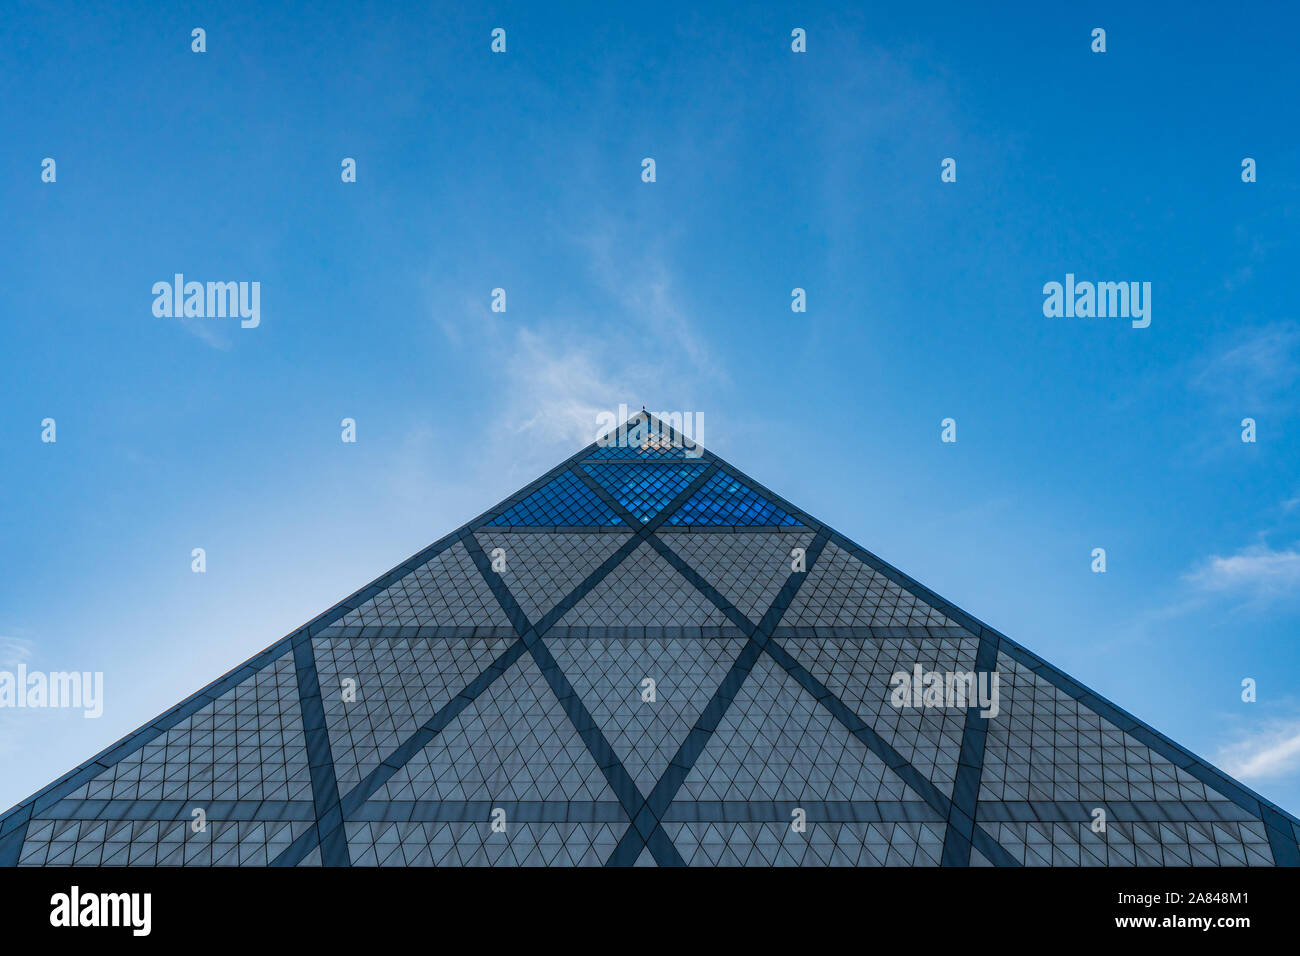 Nur-Sultan Astana Palace of Peace and Reconciliation Pyramid Building View on a Sunny Blue Sky Day Stock Photo